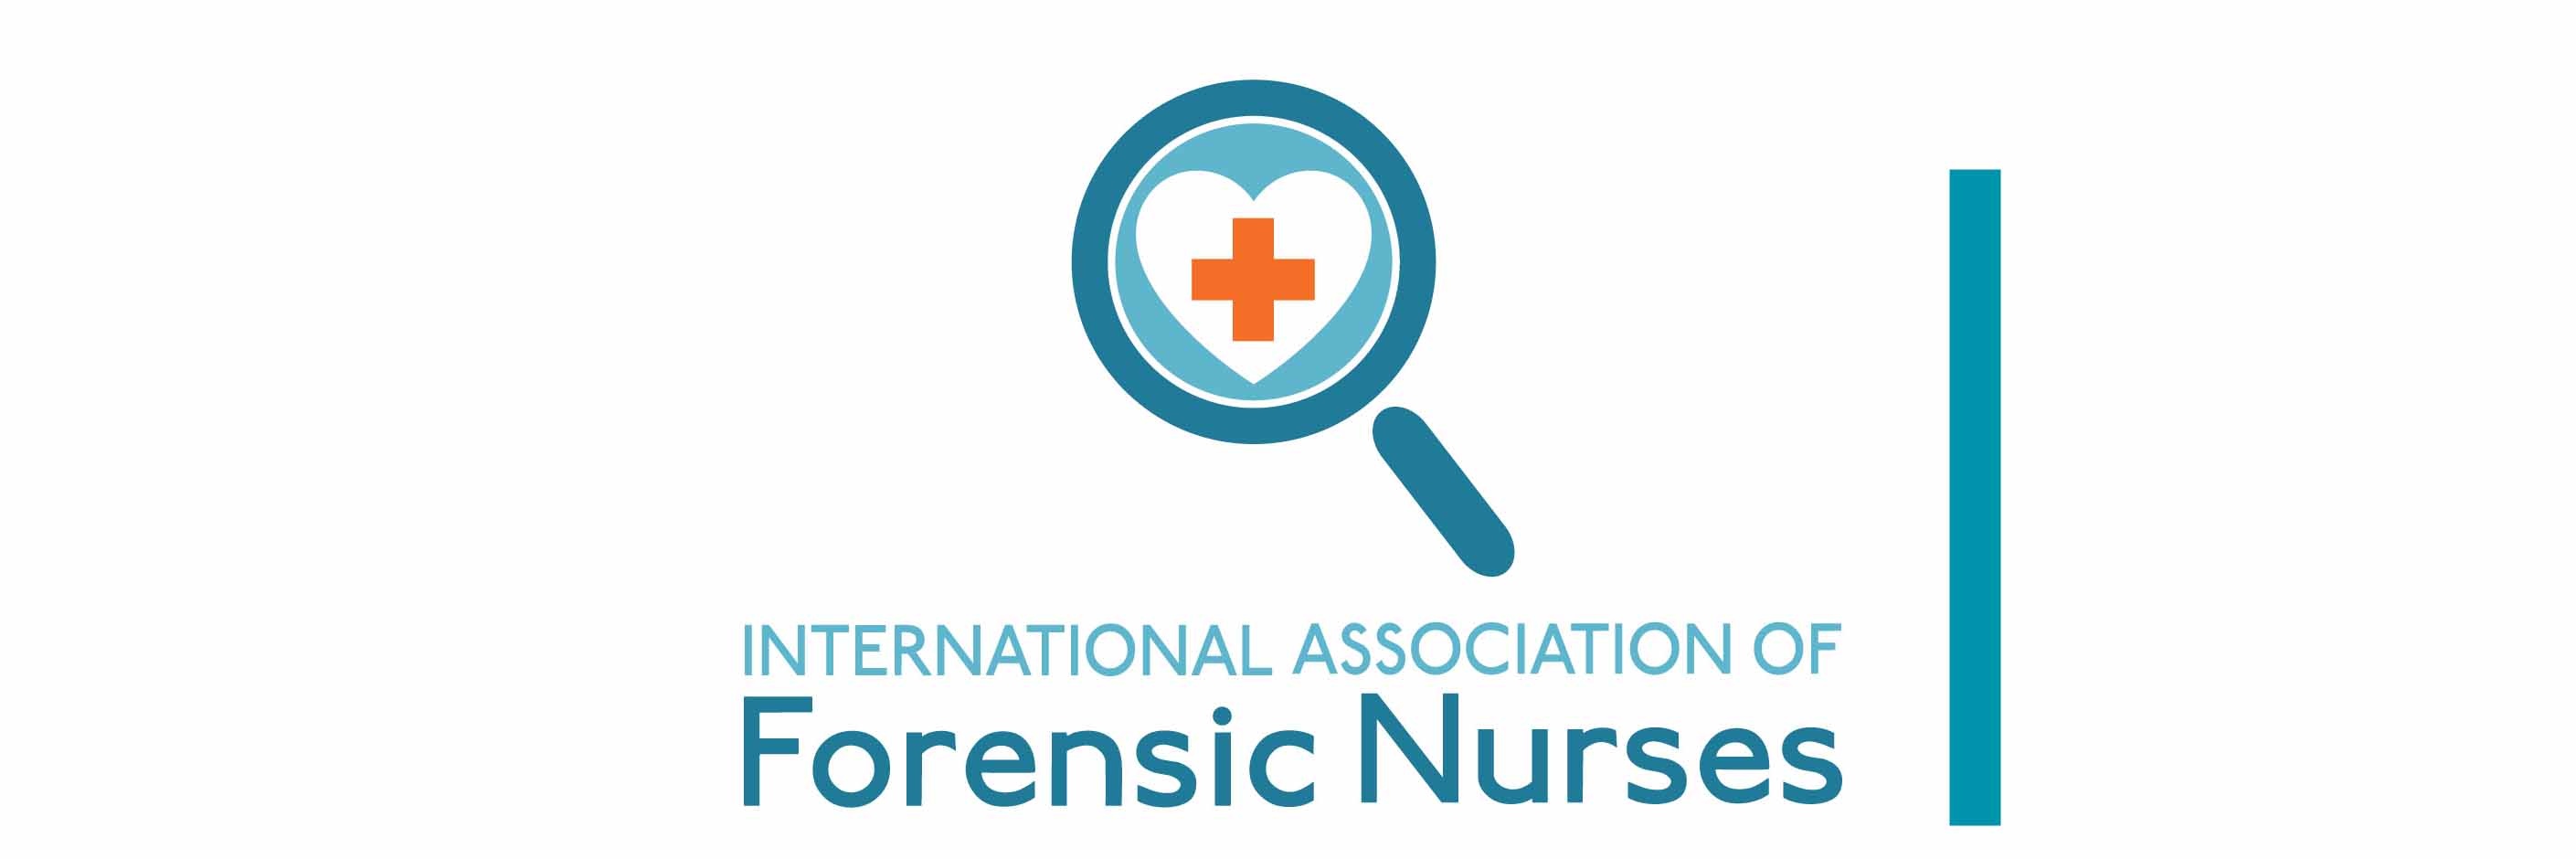 International Conference on Forensic Nursing Science and Practice